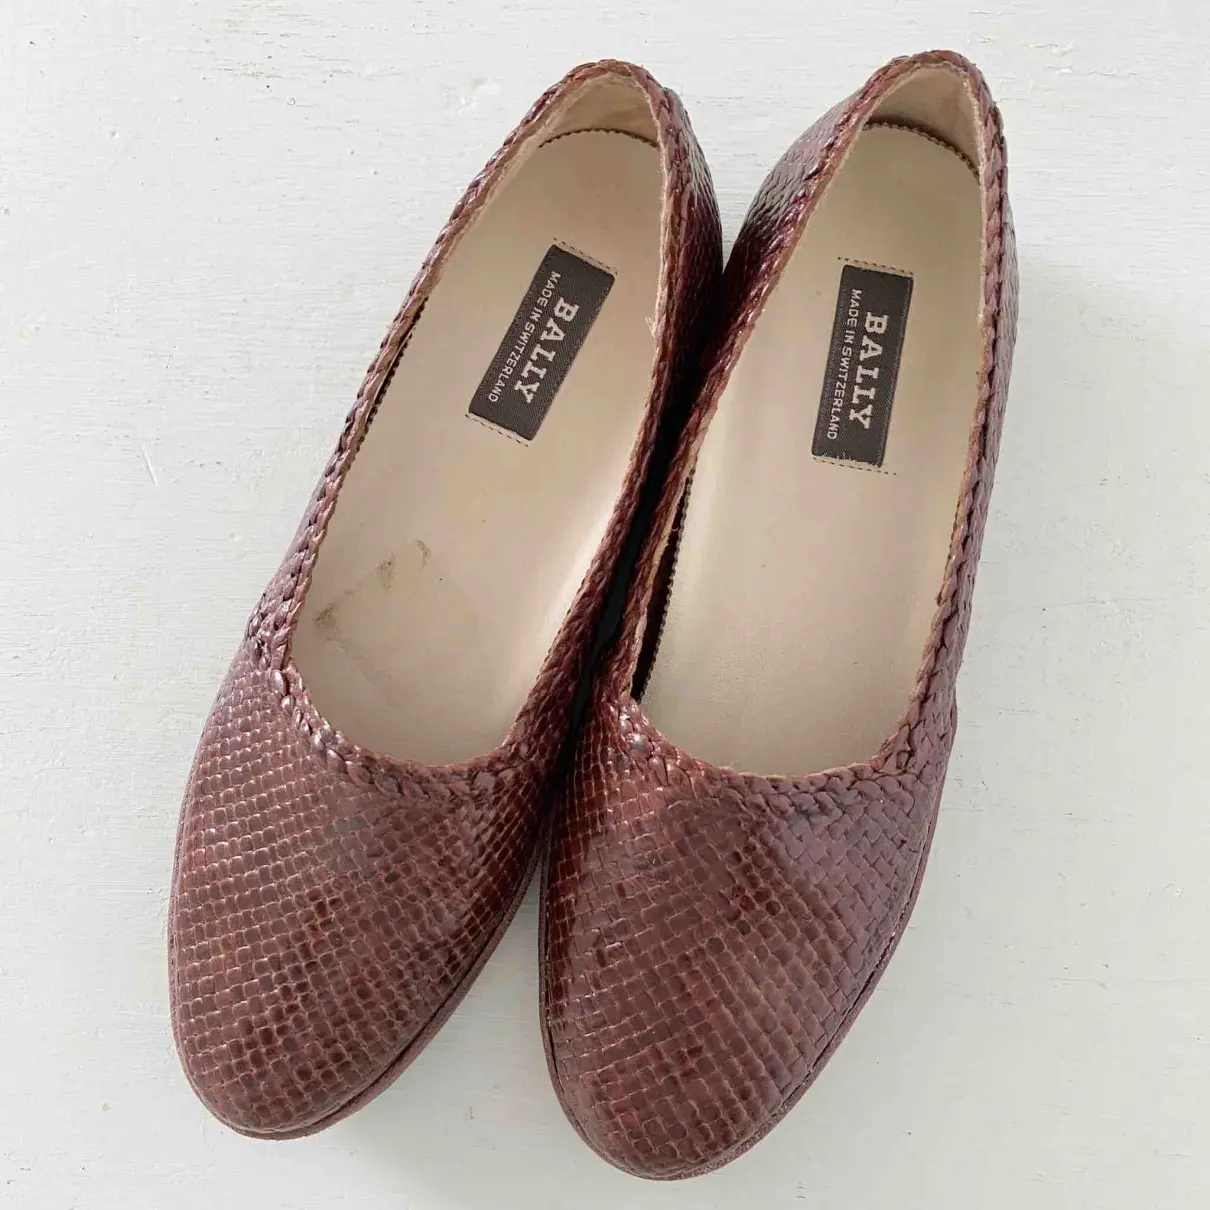 Buy Bally Leather flats online - Vintage